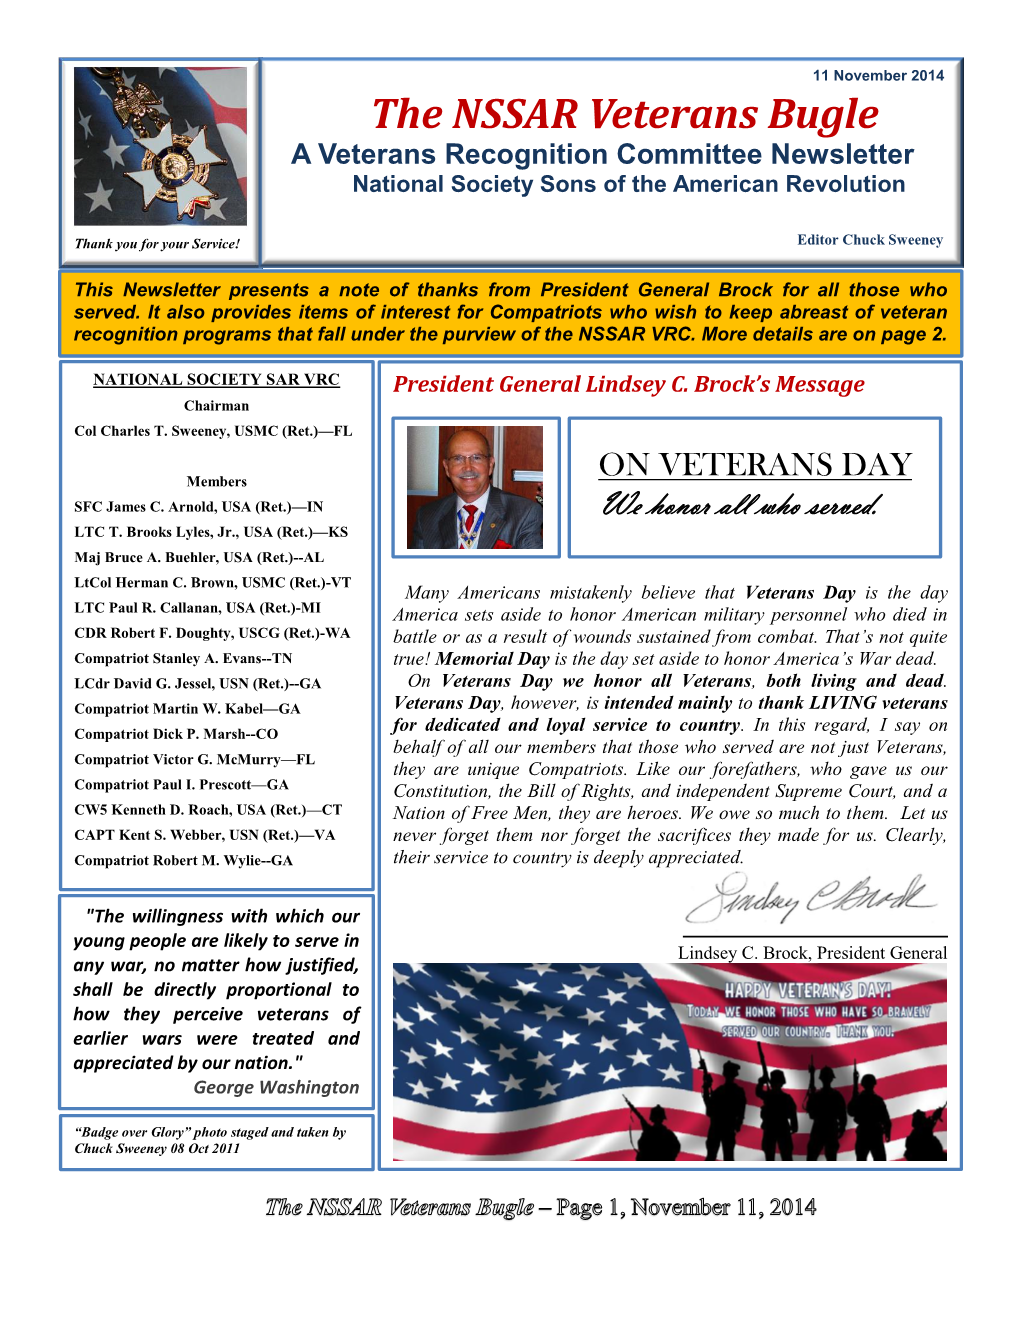 The NSSAR Veterans Bugle a Veterans Recognition Committee Newsletter National Society Sons of the American Revolution